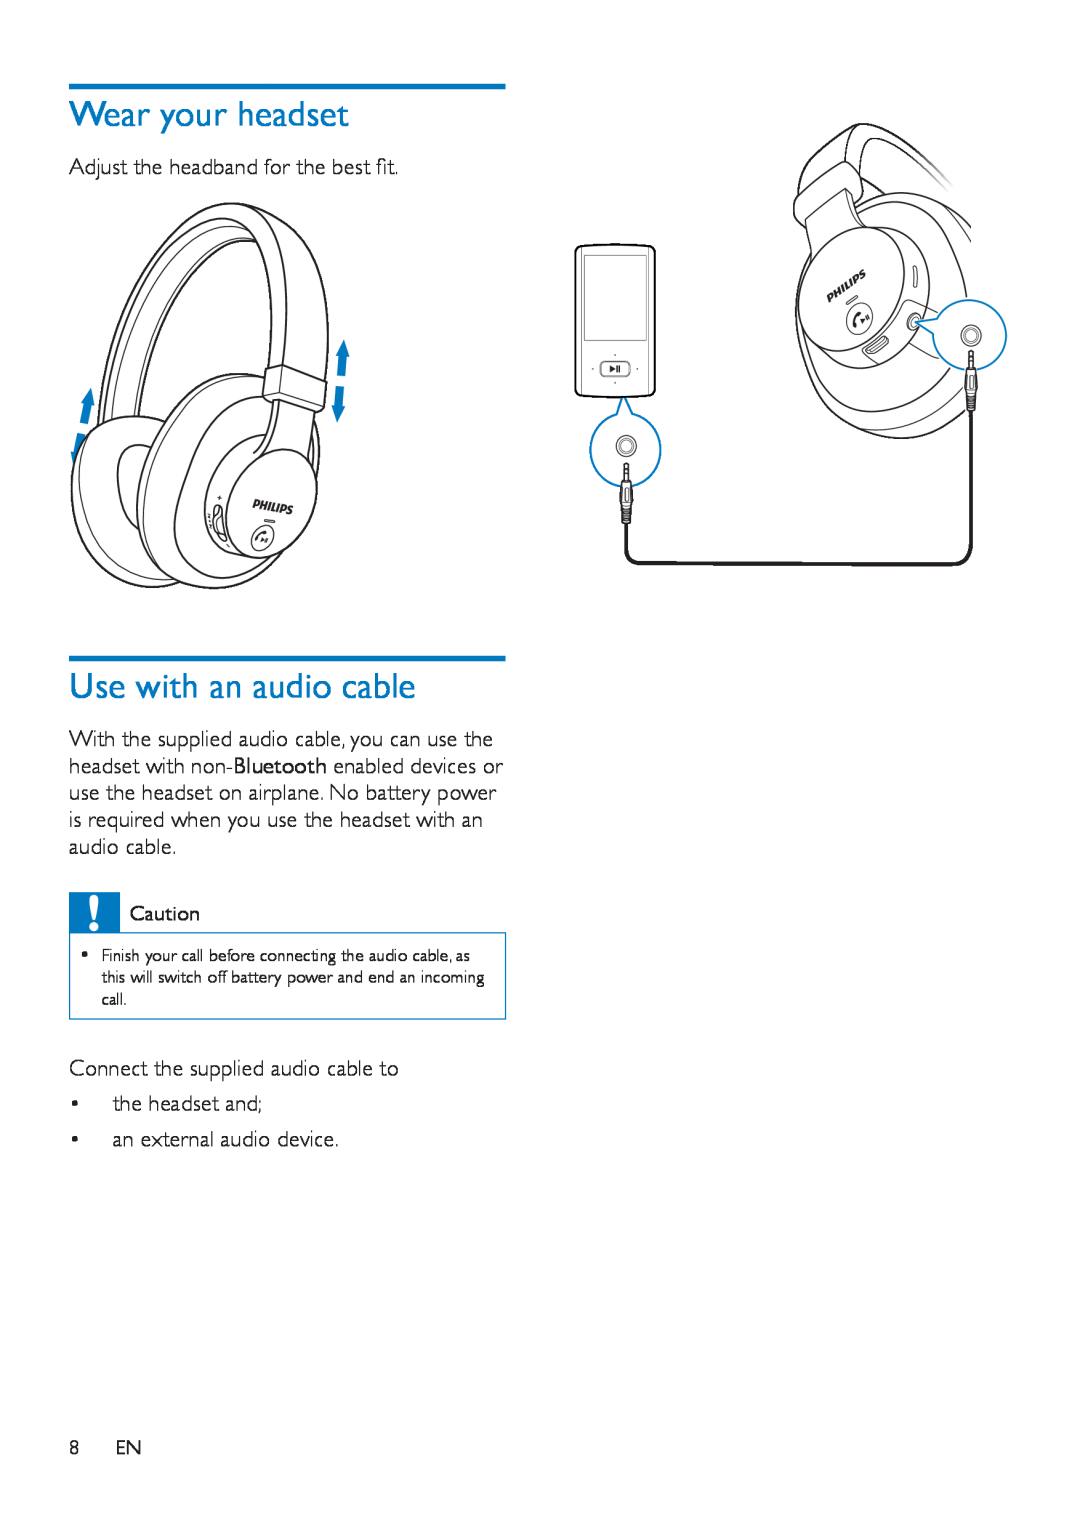 Philips SHB7000 user manual Wear your headset, Use with an audio cable, Adjust the headband for the best fit 